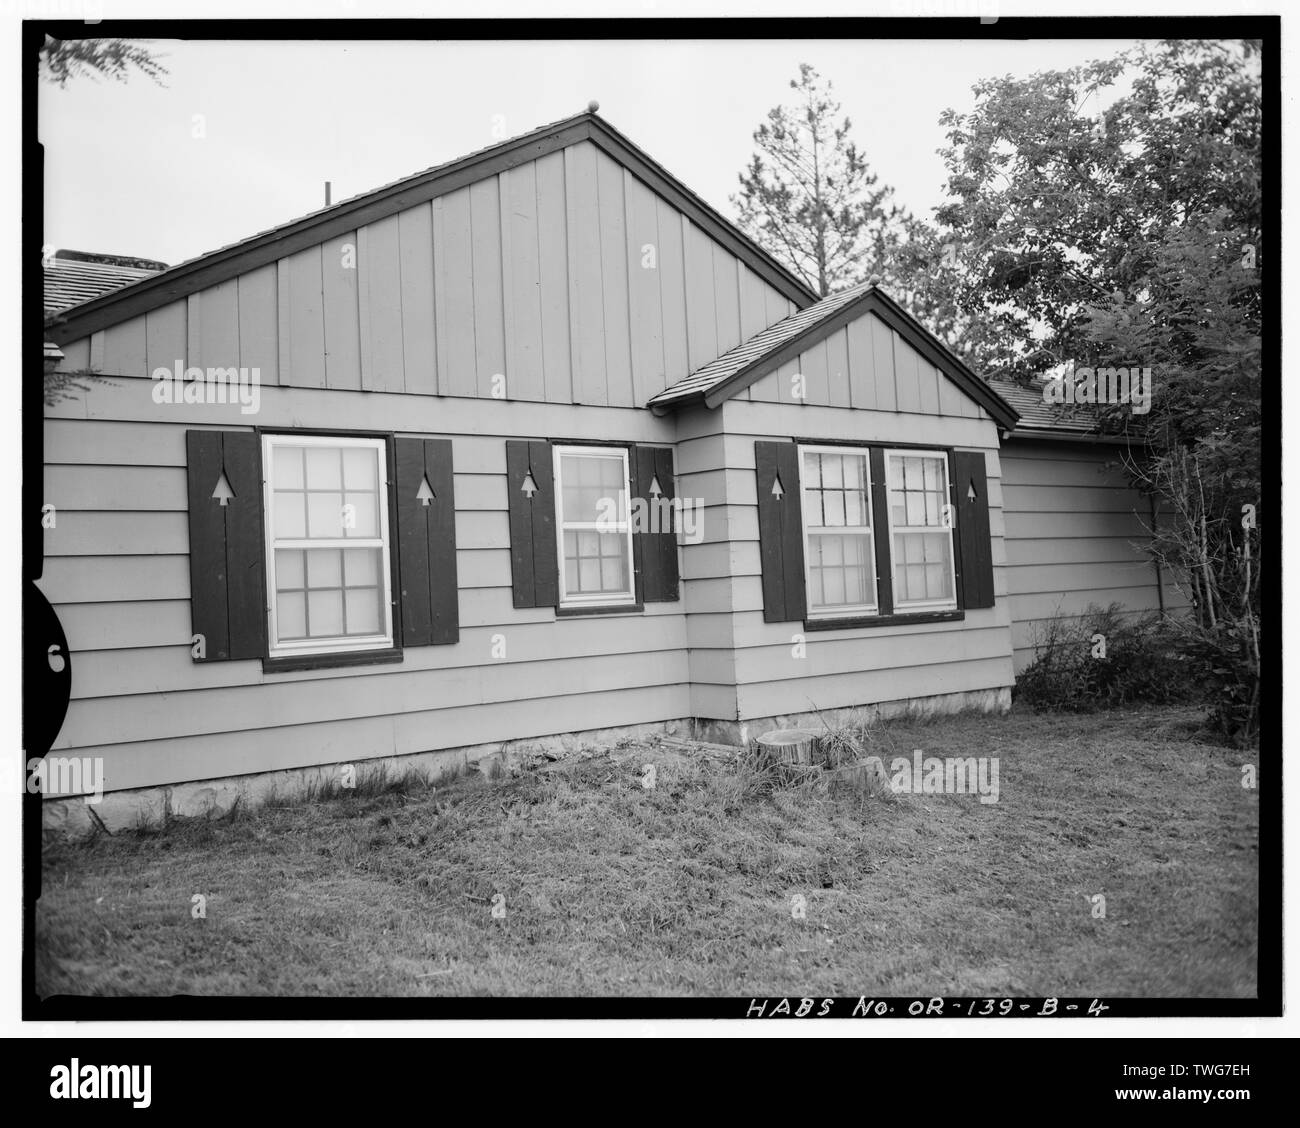 RANGERS RESIDENCE, FRONT ENTRANCE DETAIL, LOOKING NORTHEAST - Union Ranger Distric Compound, Rangers Residence, Fronting State Highway 203, at West edge of Union, Union, Union County, OR Stock Photo